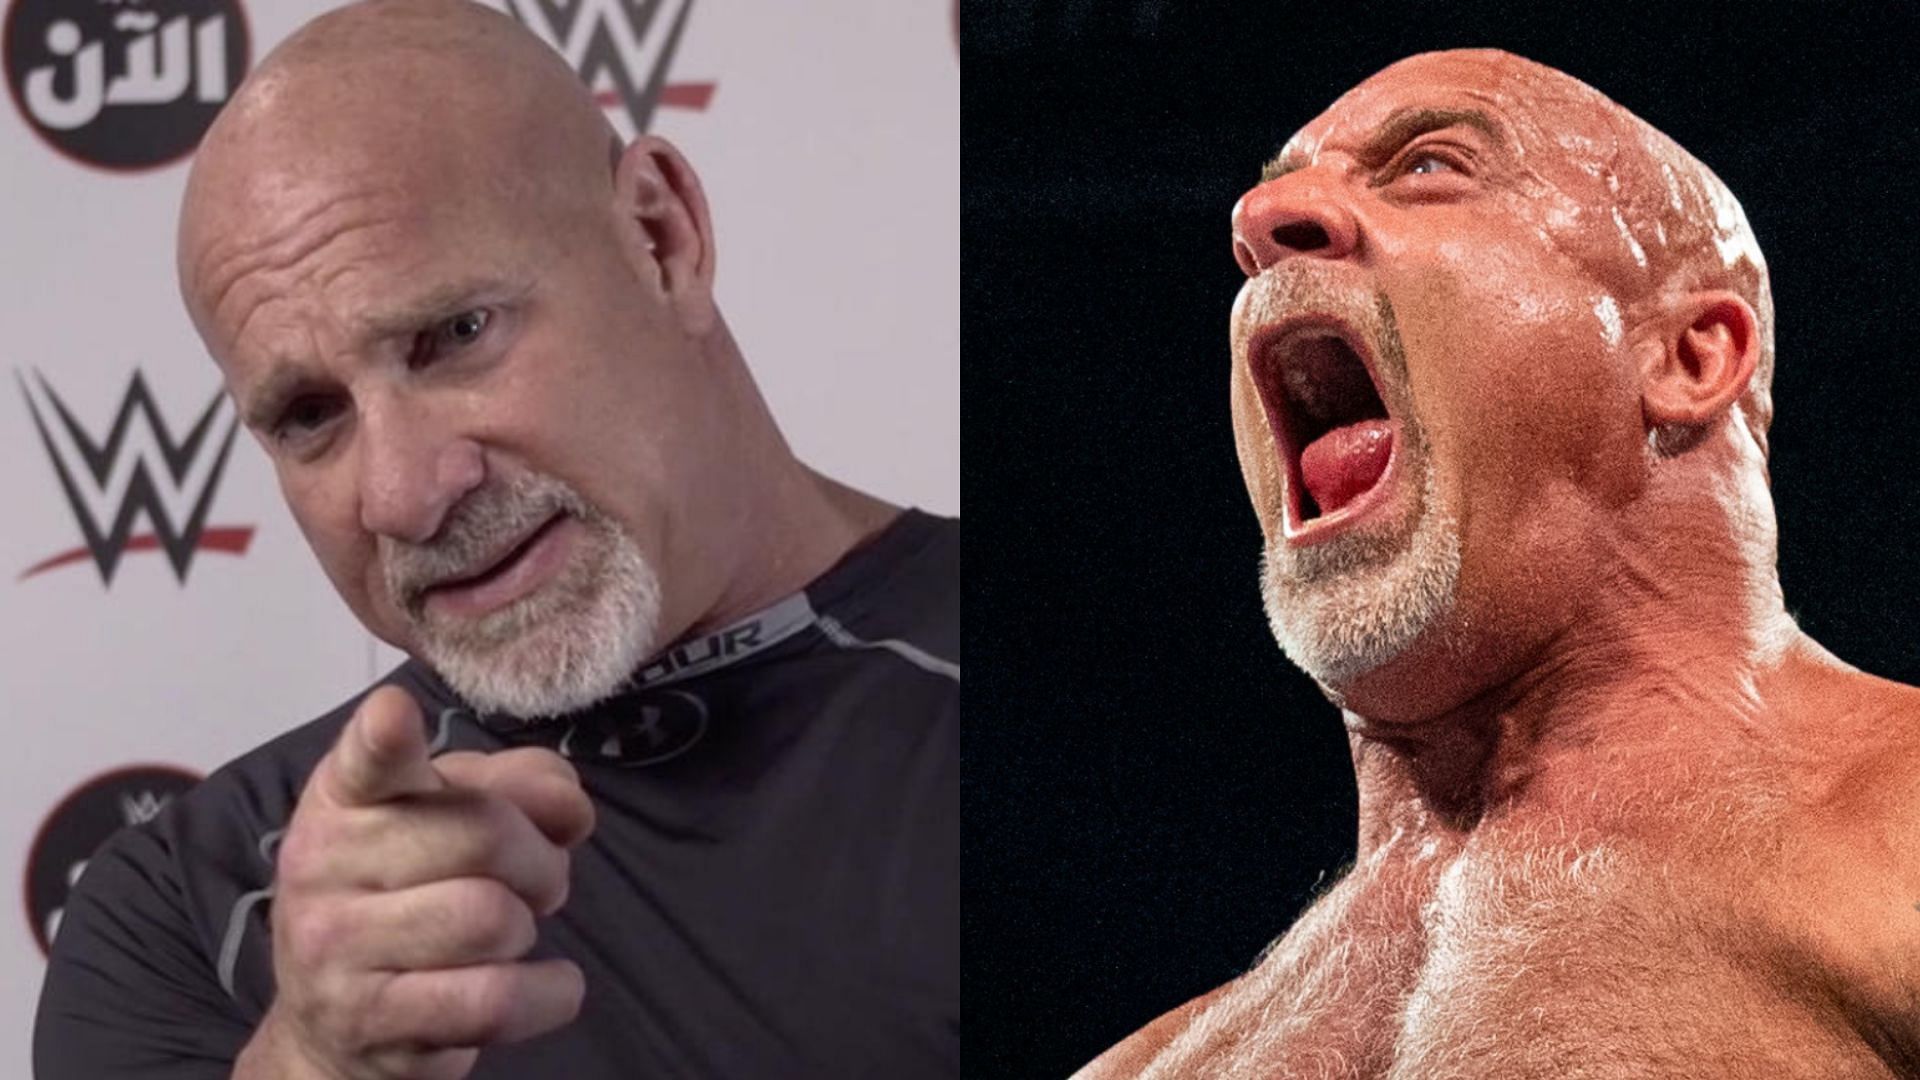 Goldberg would like to have a retirement match.